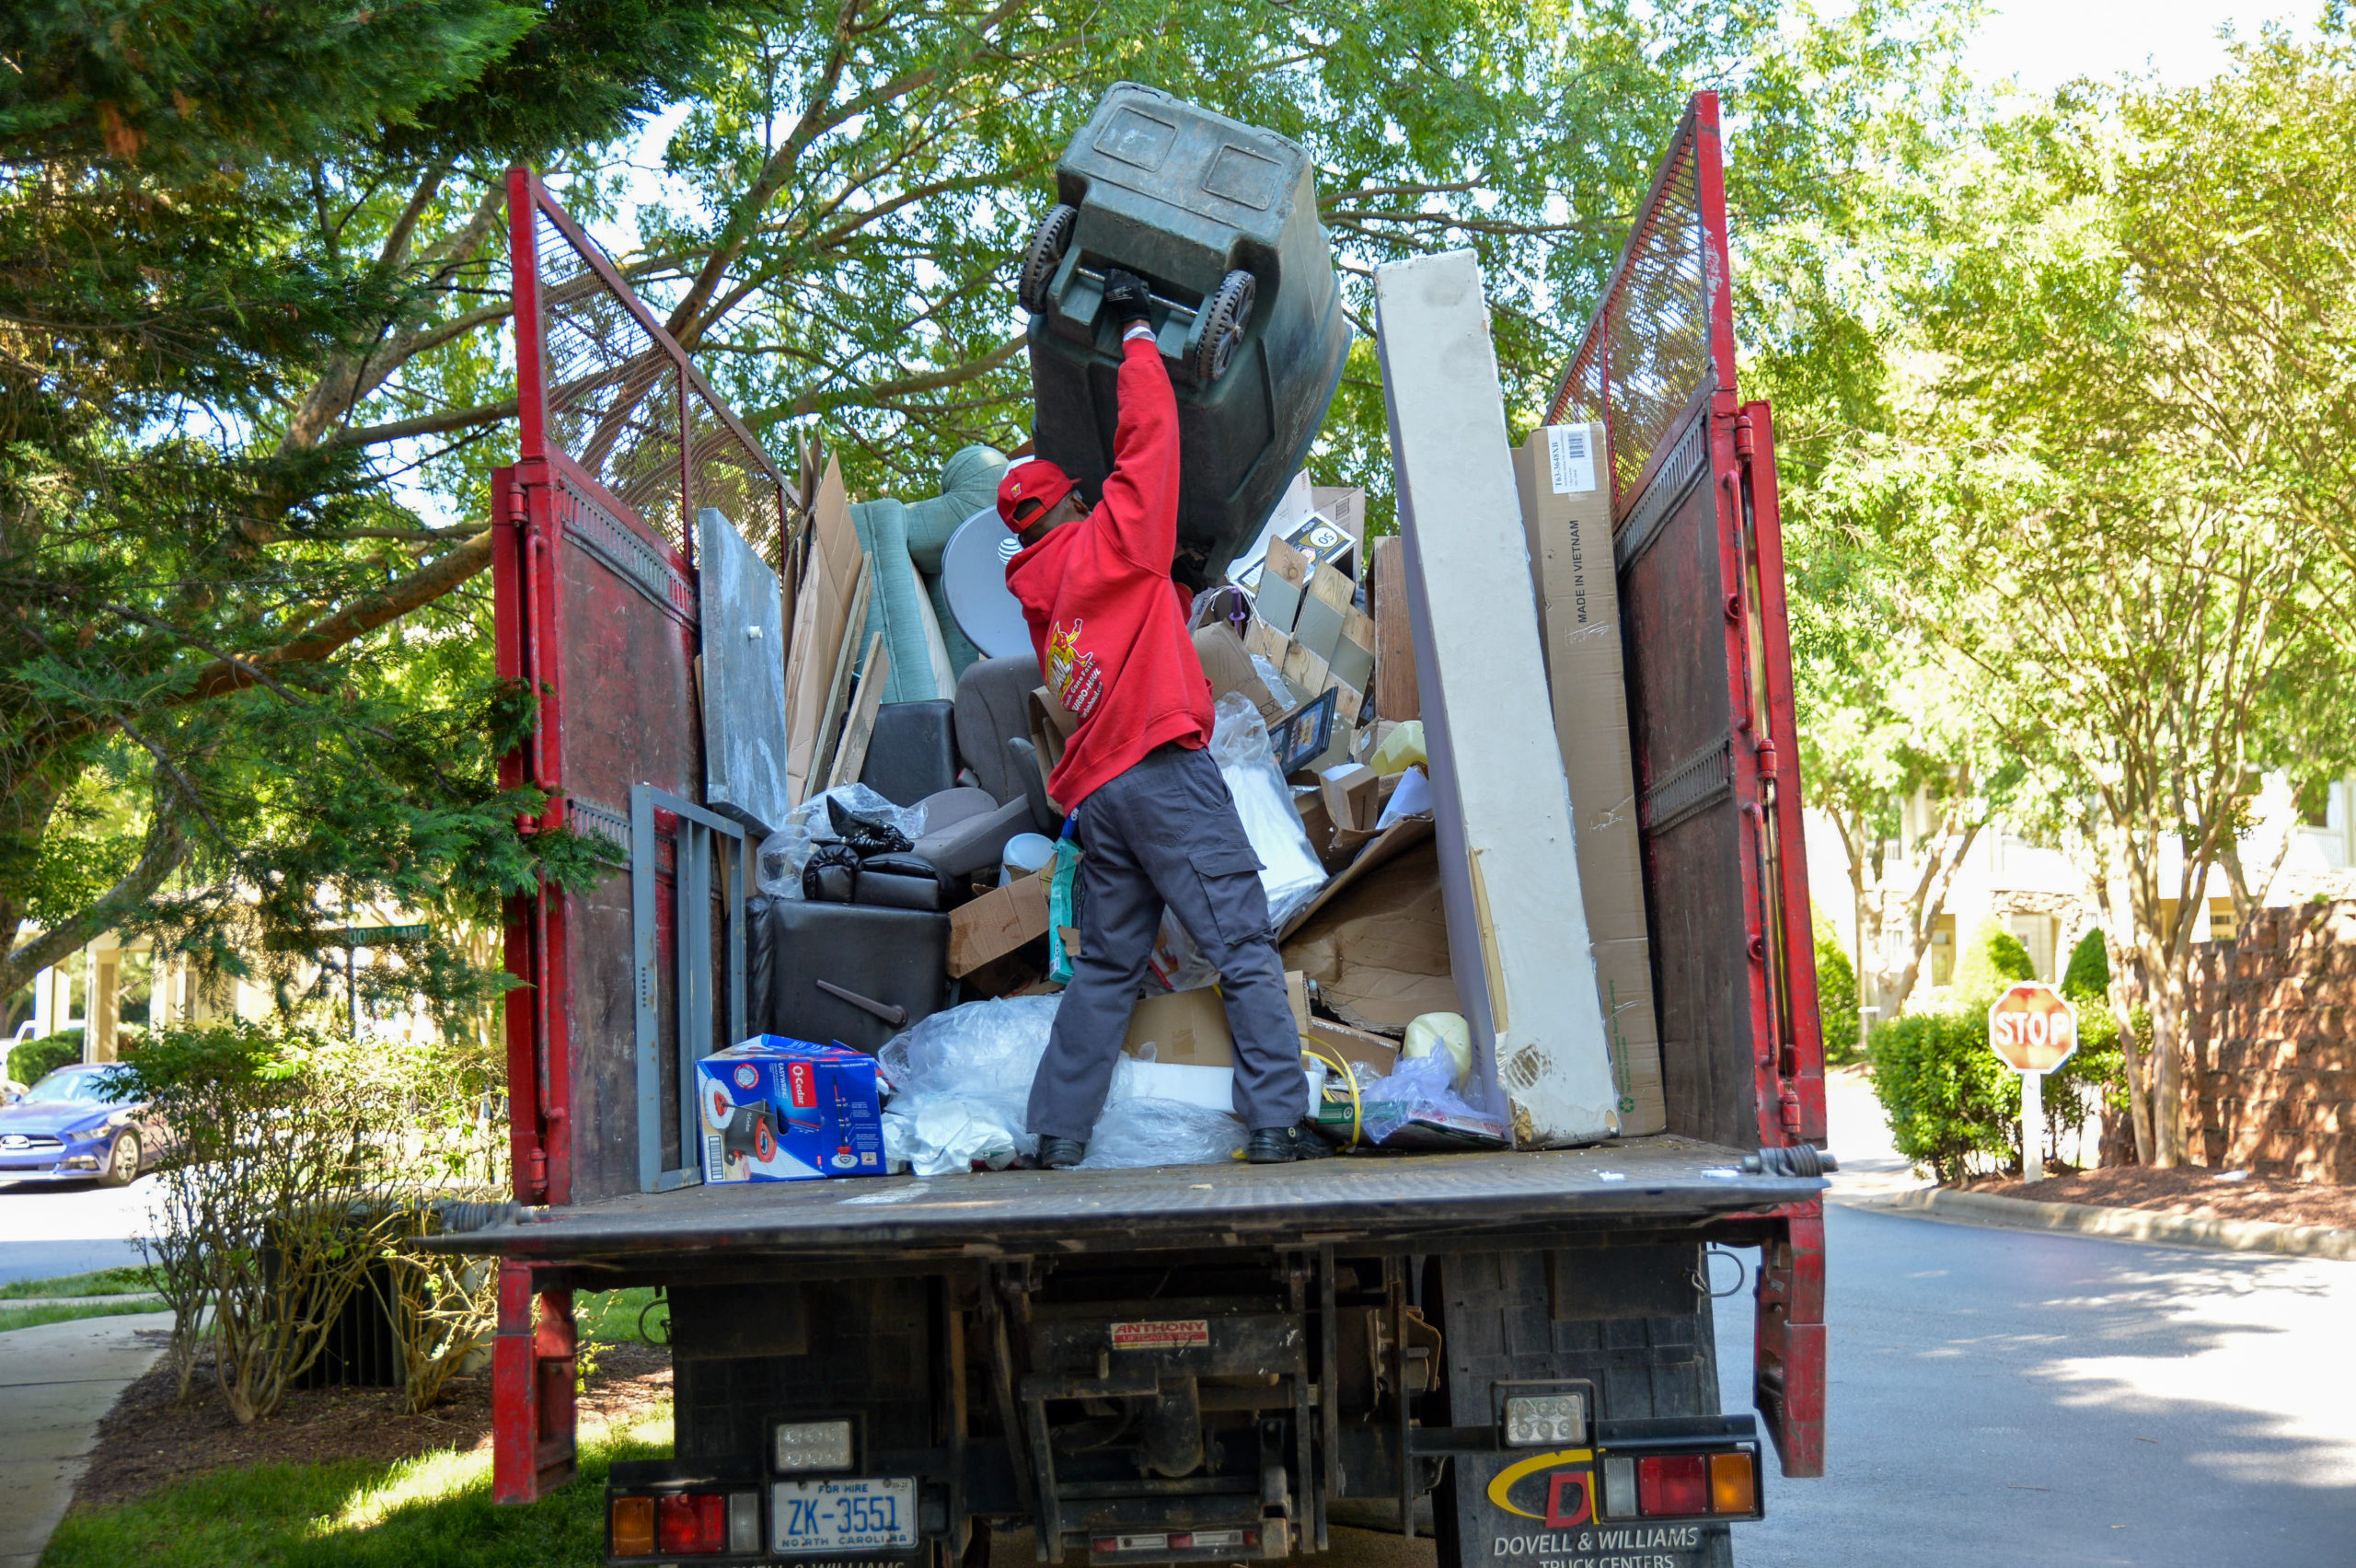 A TurboHaul employees load junk into their truck during a bulk trash removal job in Elkridge, MD.